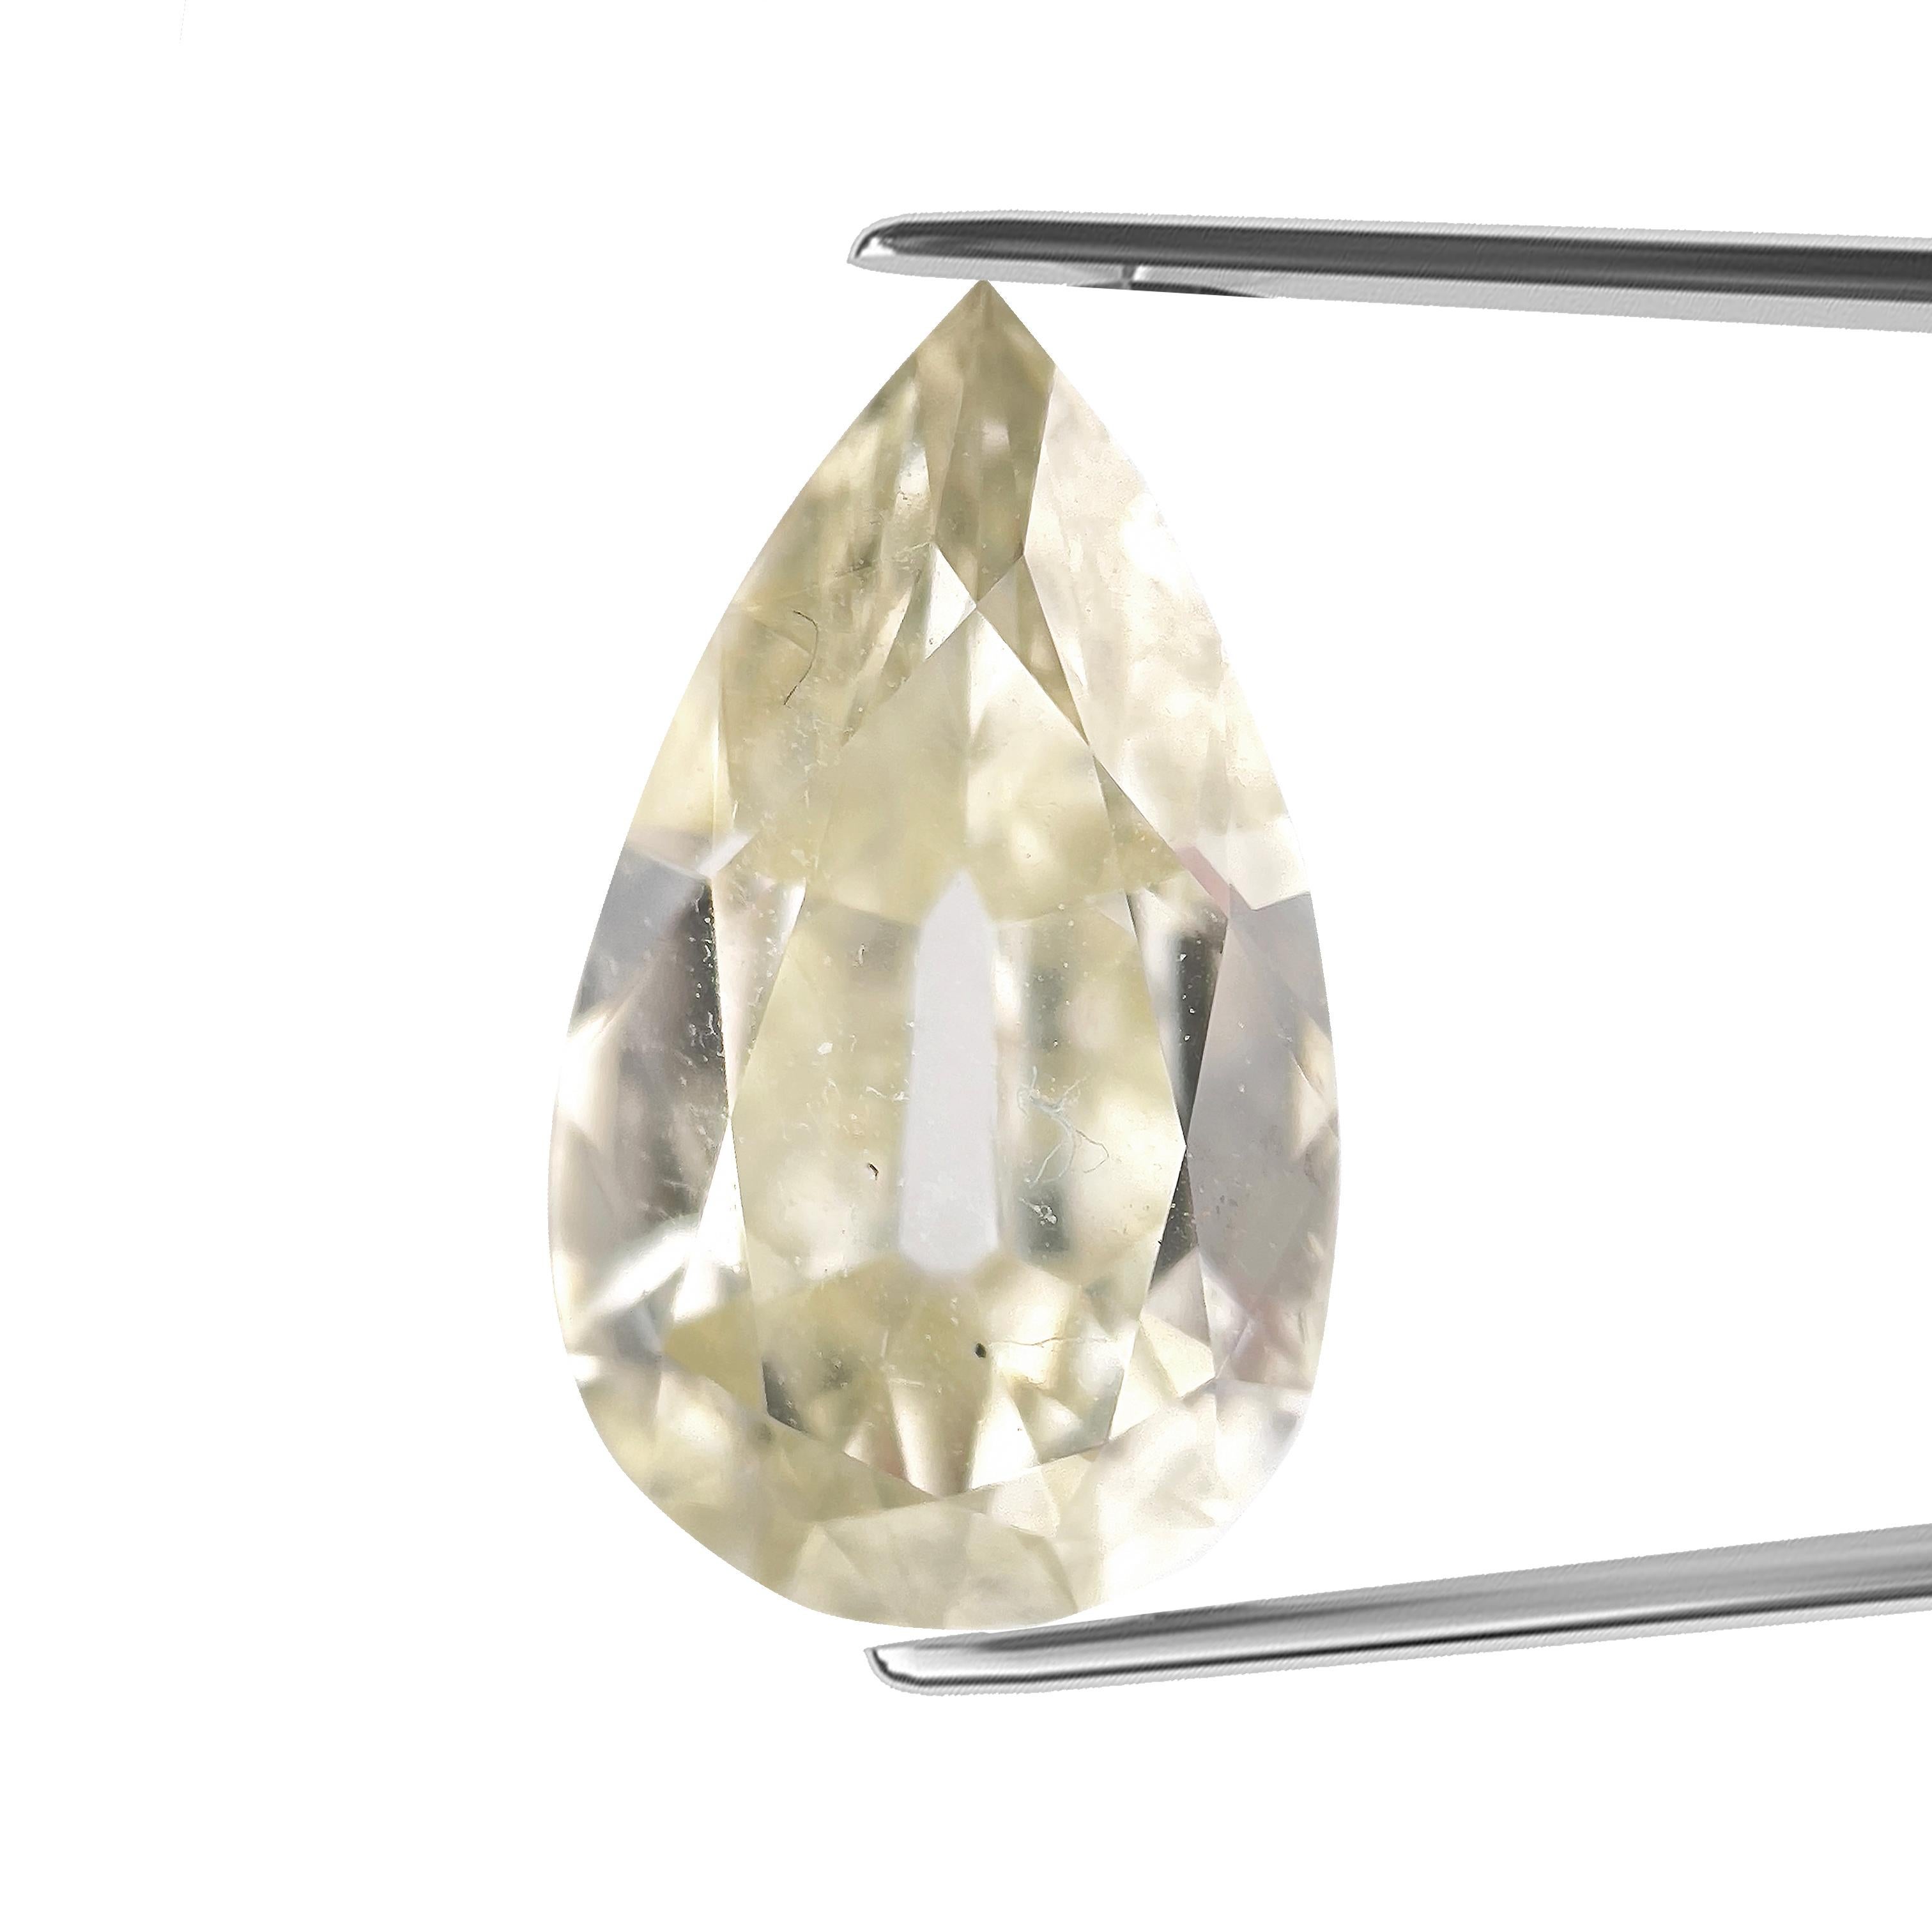 ITEM DESCRIPTION

ID #: 56917
Stone Shape: Pear Shape Antique Diamond
Diamond Weight: 1.01 CT
Clarity: VS2
Color: K
Measurements: 9.16 x 5.29 x 2.71 mm
Our Price: $4480.00
Appraisal Price: $6720.00


These genuine diamonds are graded approximate by